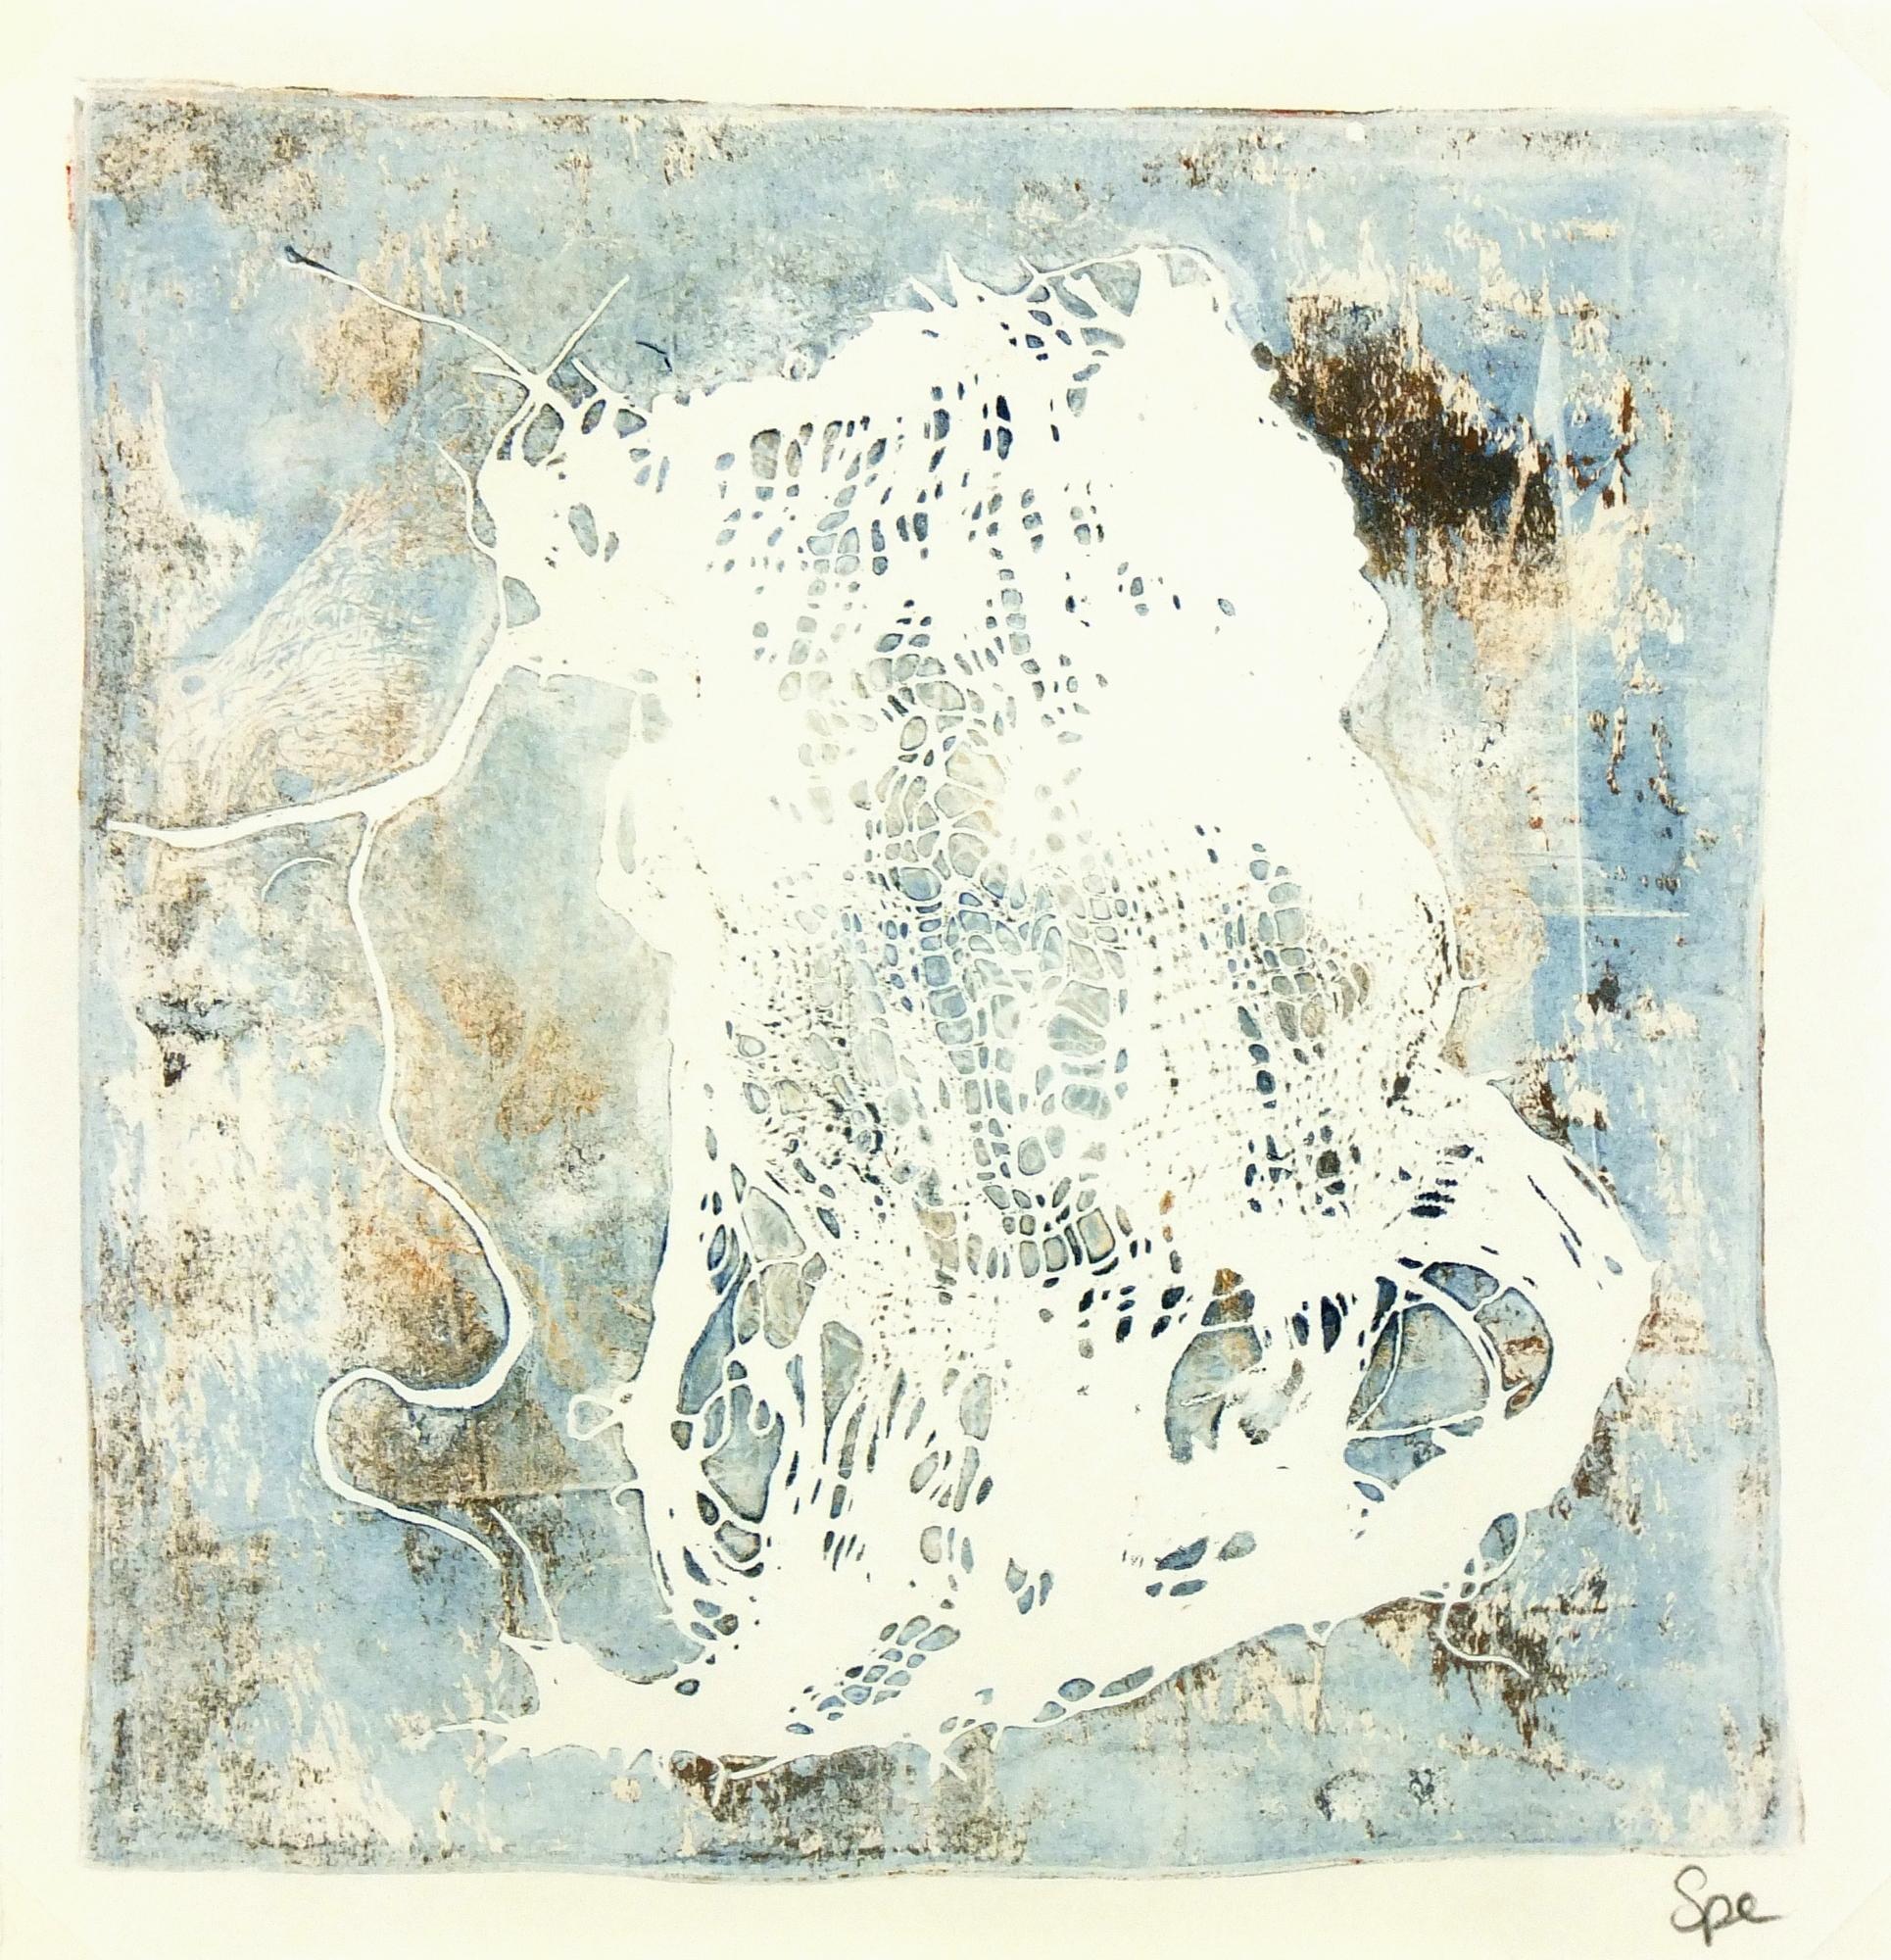 Abstract painting on light blue background with shades of gold/borwn by English artist Spe, 2013.  Signed lower right.

Original artwork on paper displayed on a white mat with a gold border. Mat fits a standard-size frame. Archival plastic sleeve